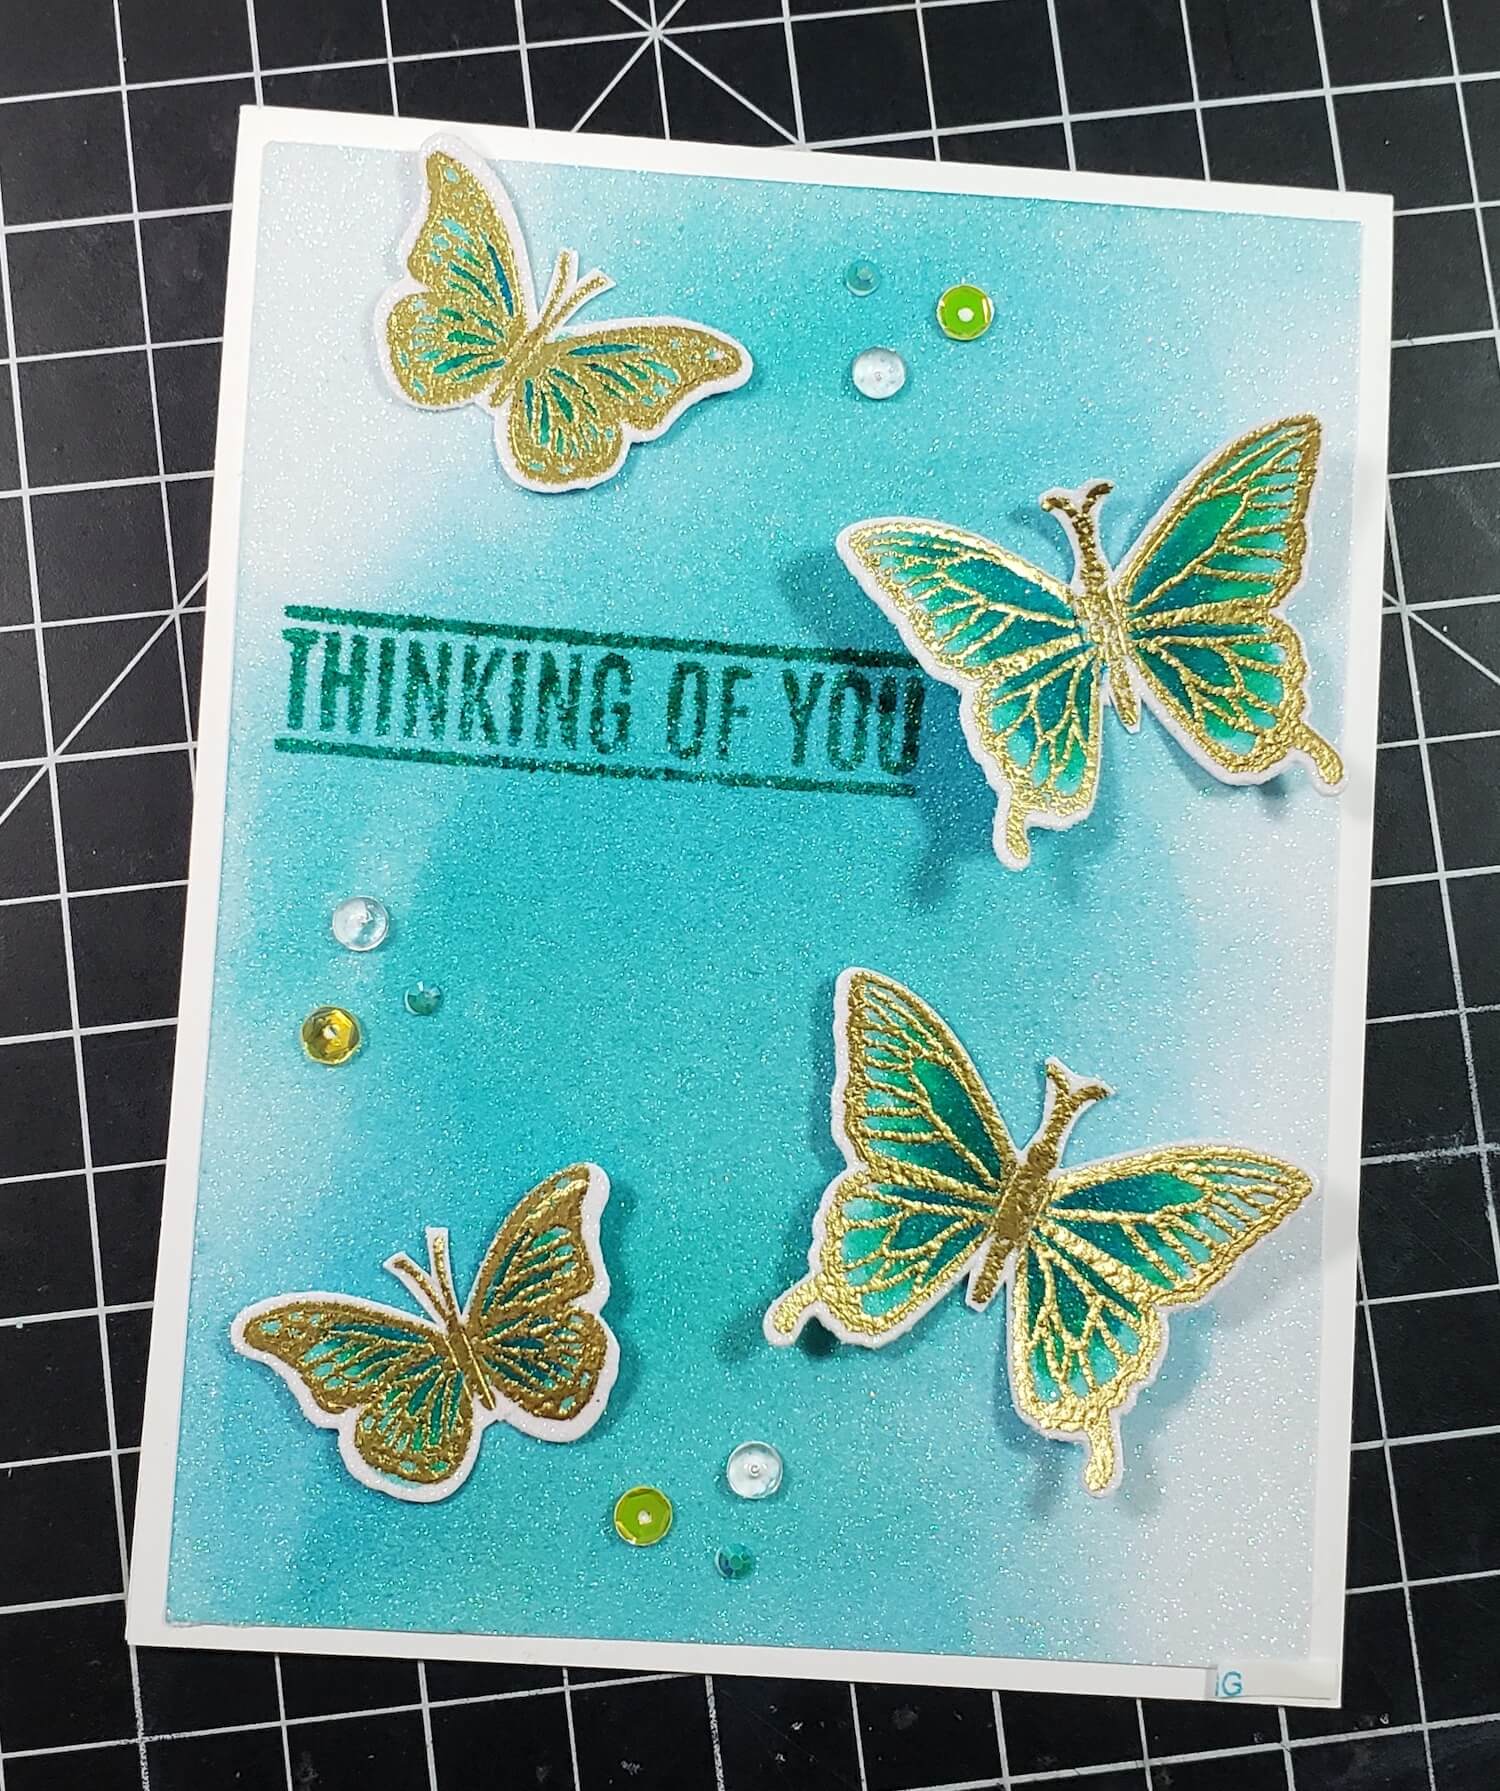 Finished White Glitter Butterfly Card with Sequins